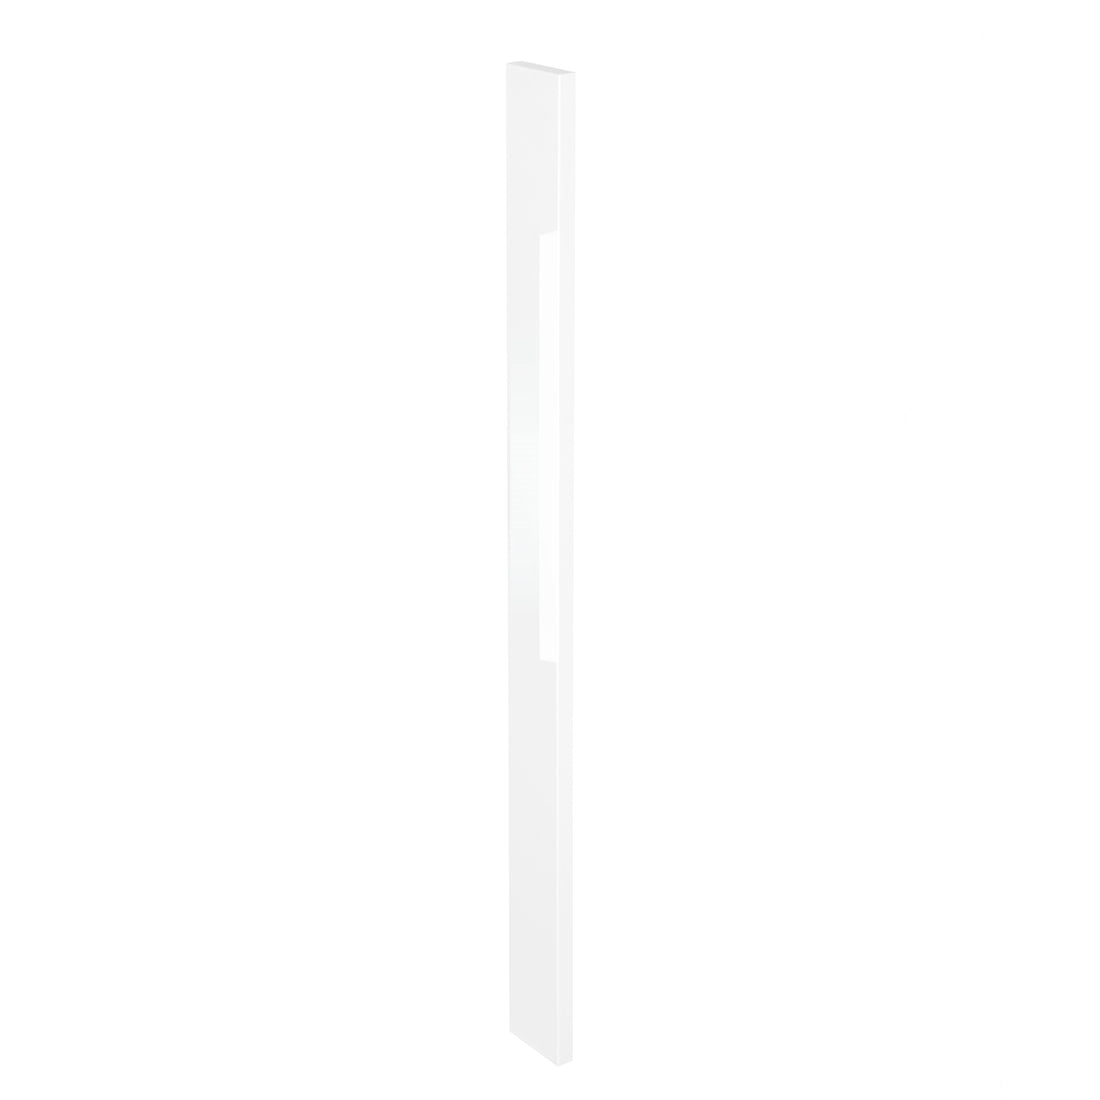 White Gloss Slab Style Kitchen Cabinet Filler (3 in W x 0.75 in D x 42 in H) -  Pro-Edge HD